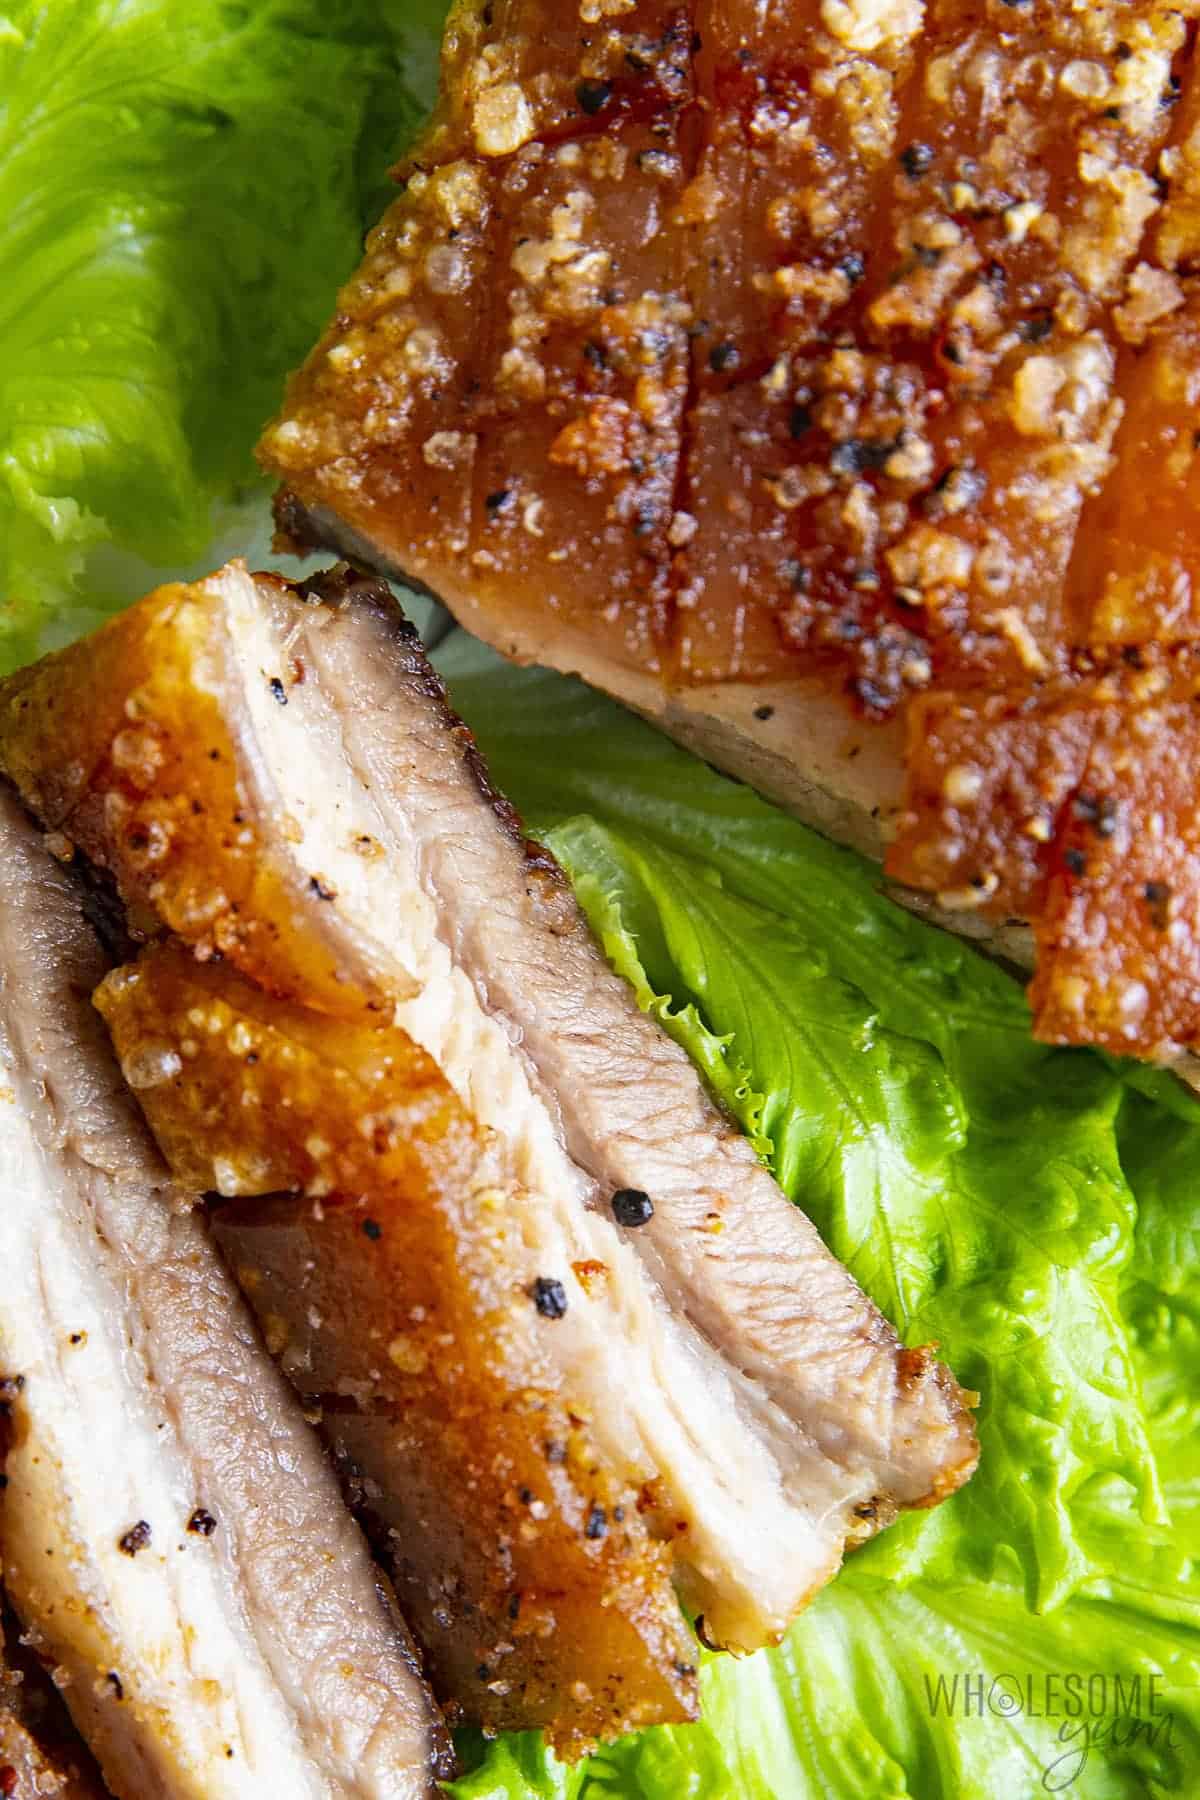 What's the best keto Chinese food to get? Pork belly, like the one shown here, is a safer option.